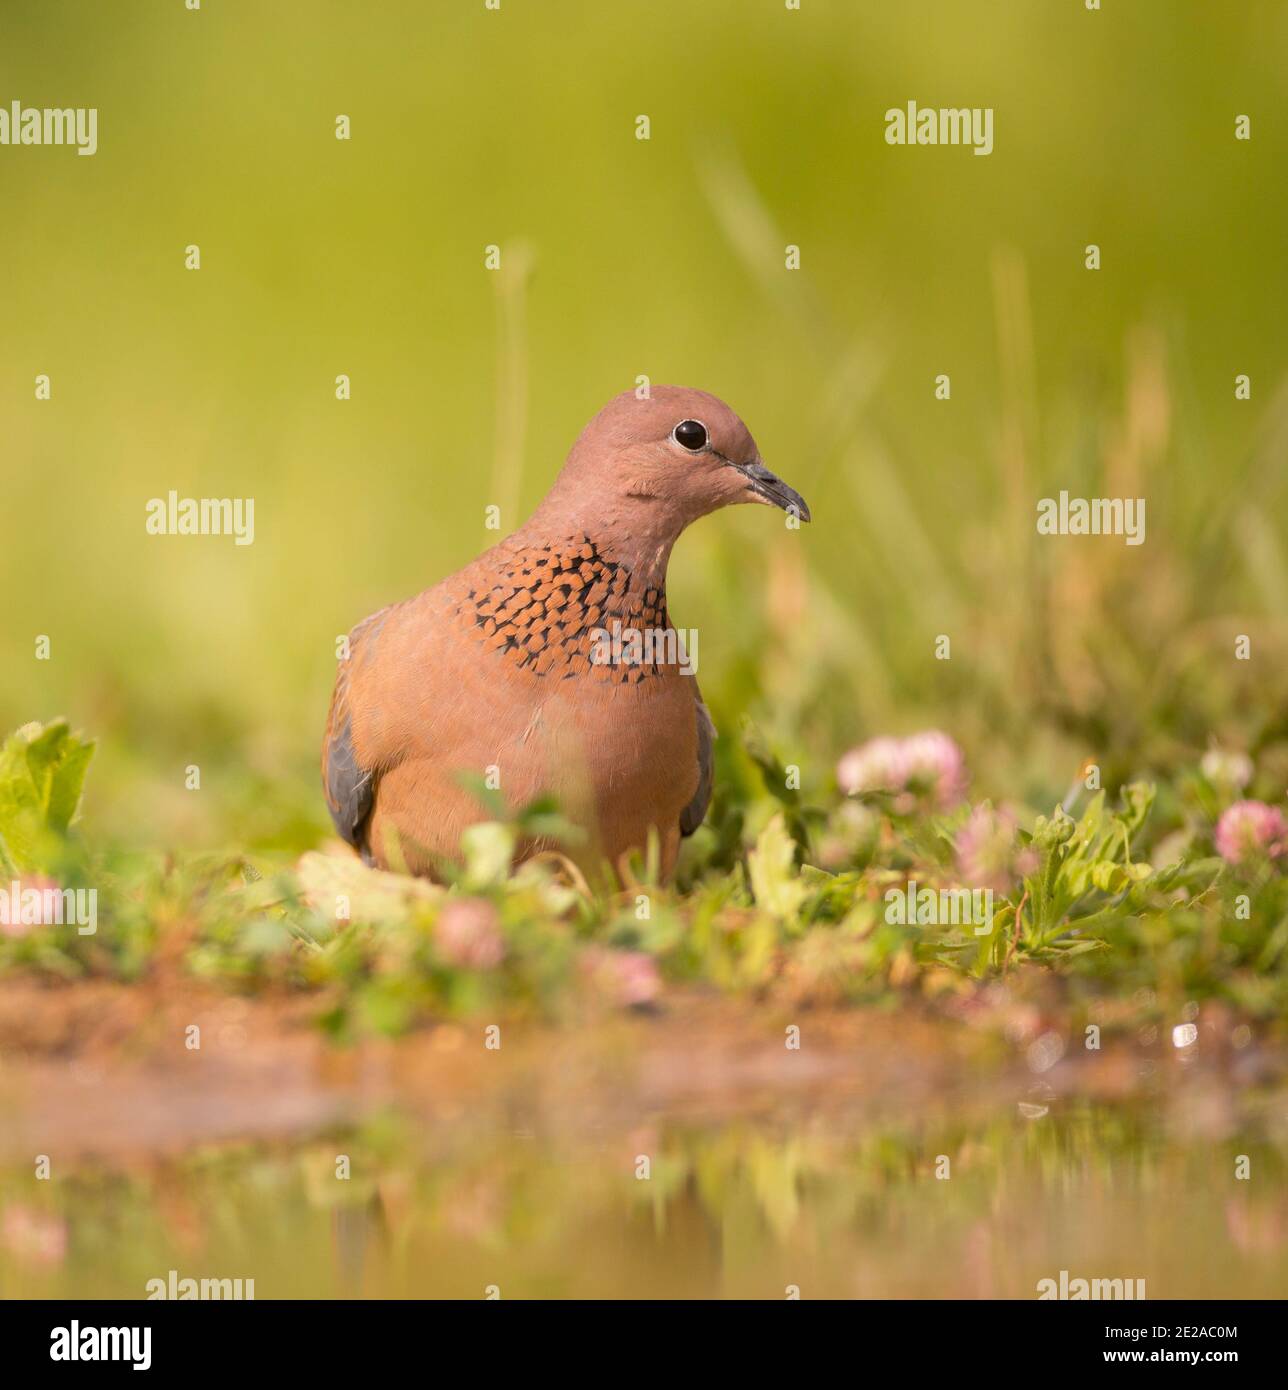 Laughing dove (Streptopelia senegalensis). This bird is native to sub-Saharan Africa, the Middle East, and India, where it is known as the little brow Stock Photo